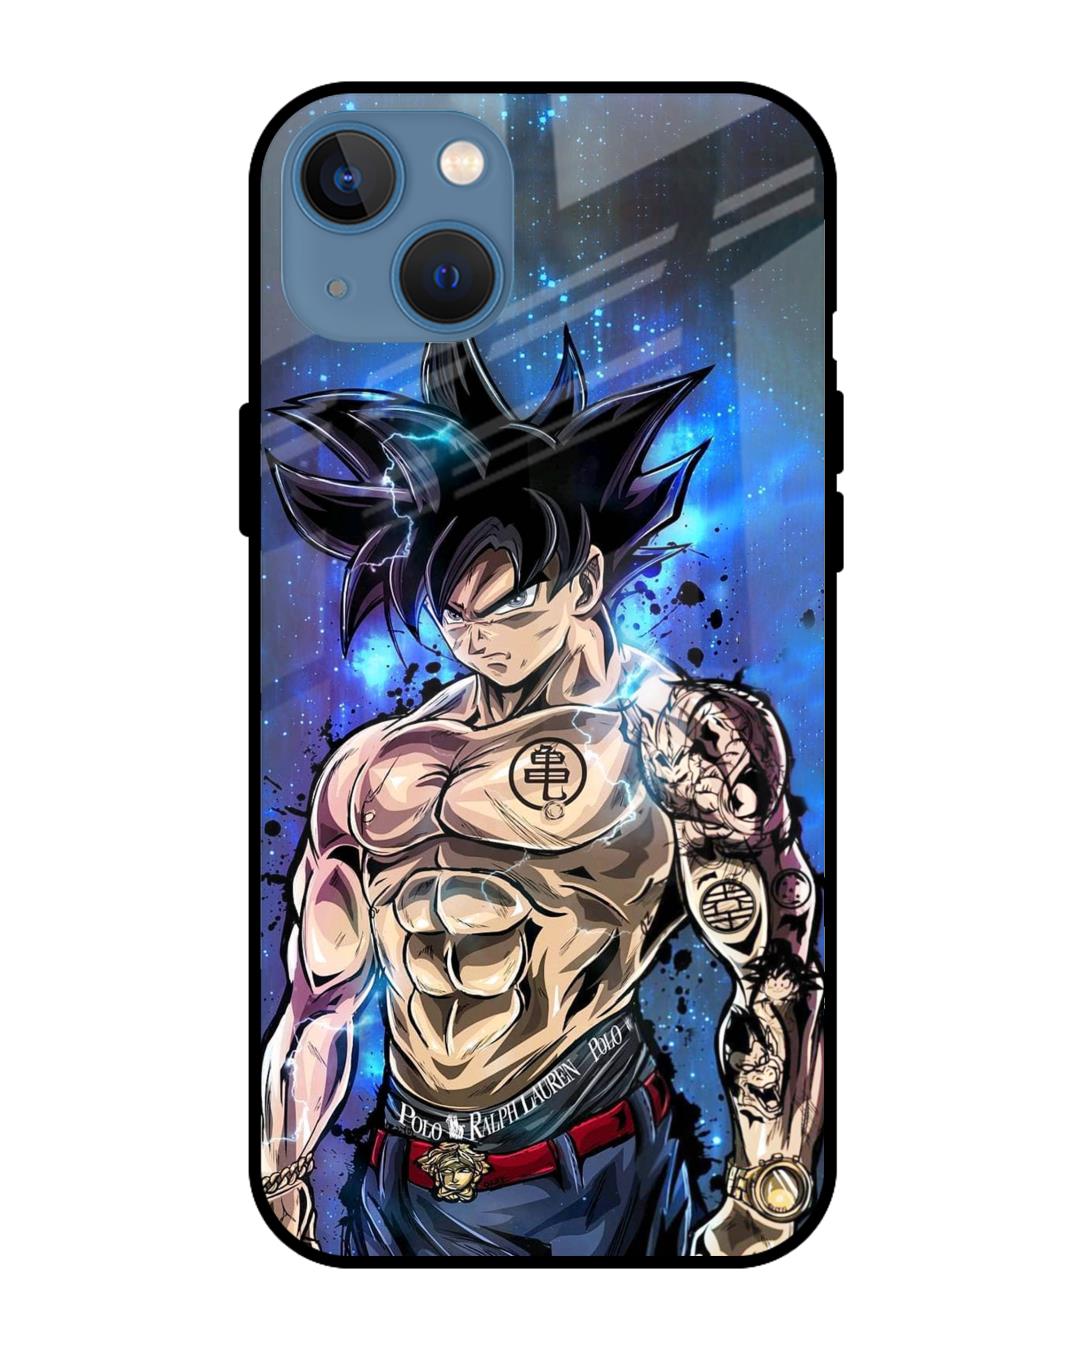 Buy Voleano back cover for I Phone 13 Itachi Anime Fire Naruto Sasuke  cases cover Online at Best Prices in India  JioMart